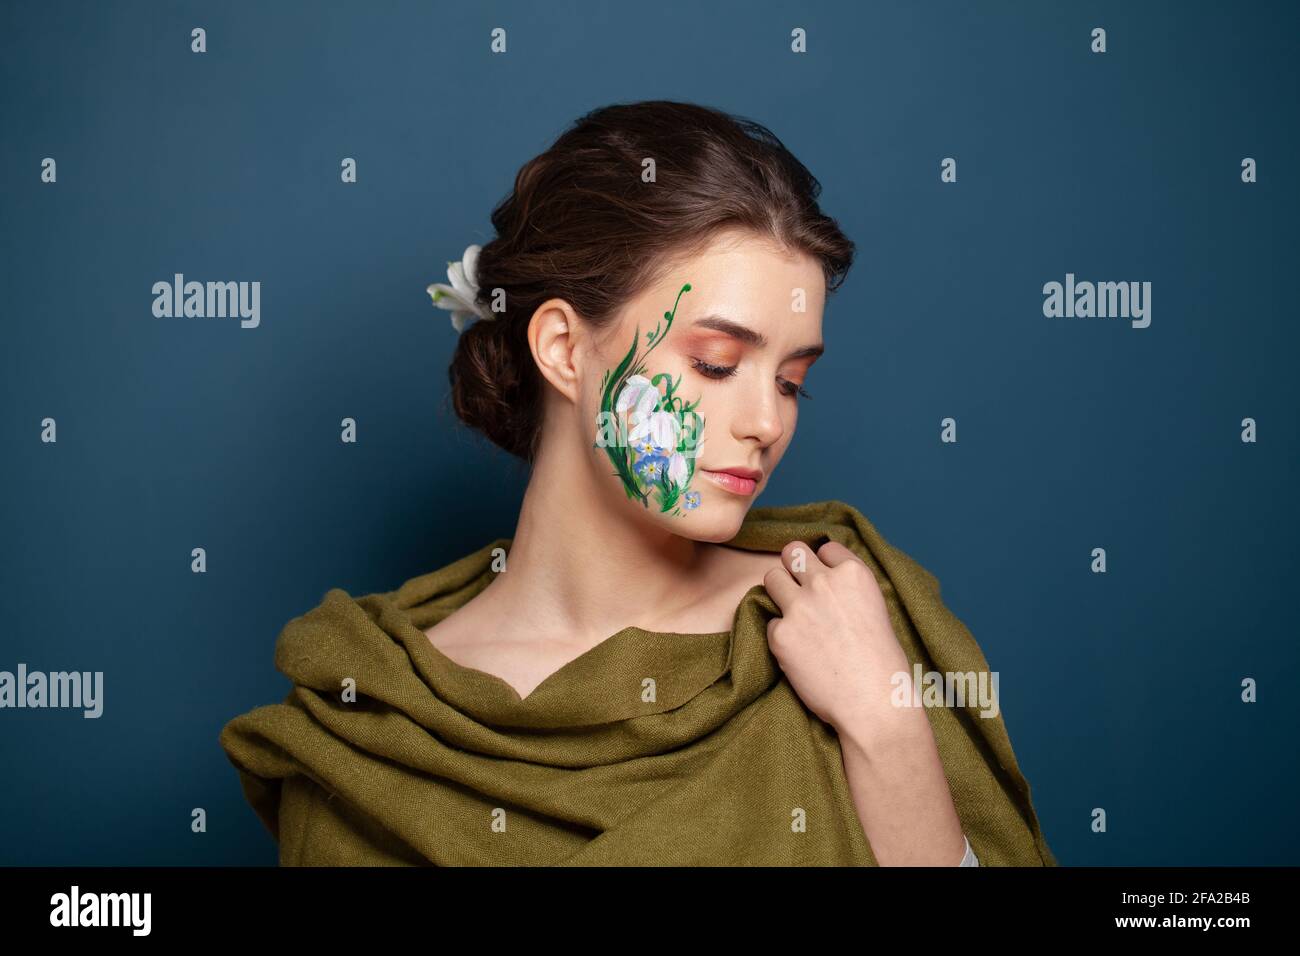 Perfect woman with painted flowers on her face on blue background Stock Photo